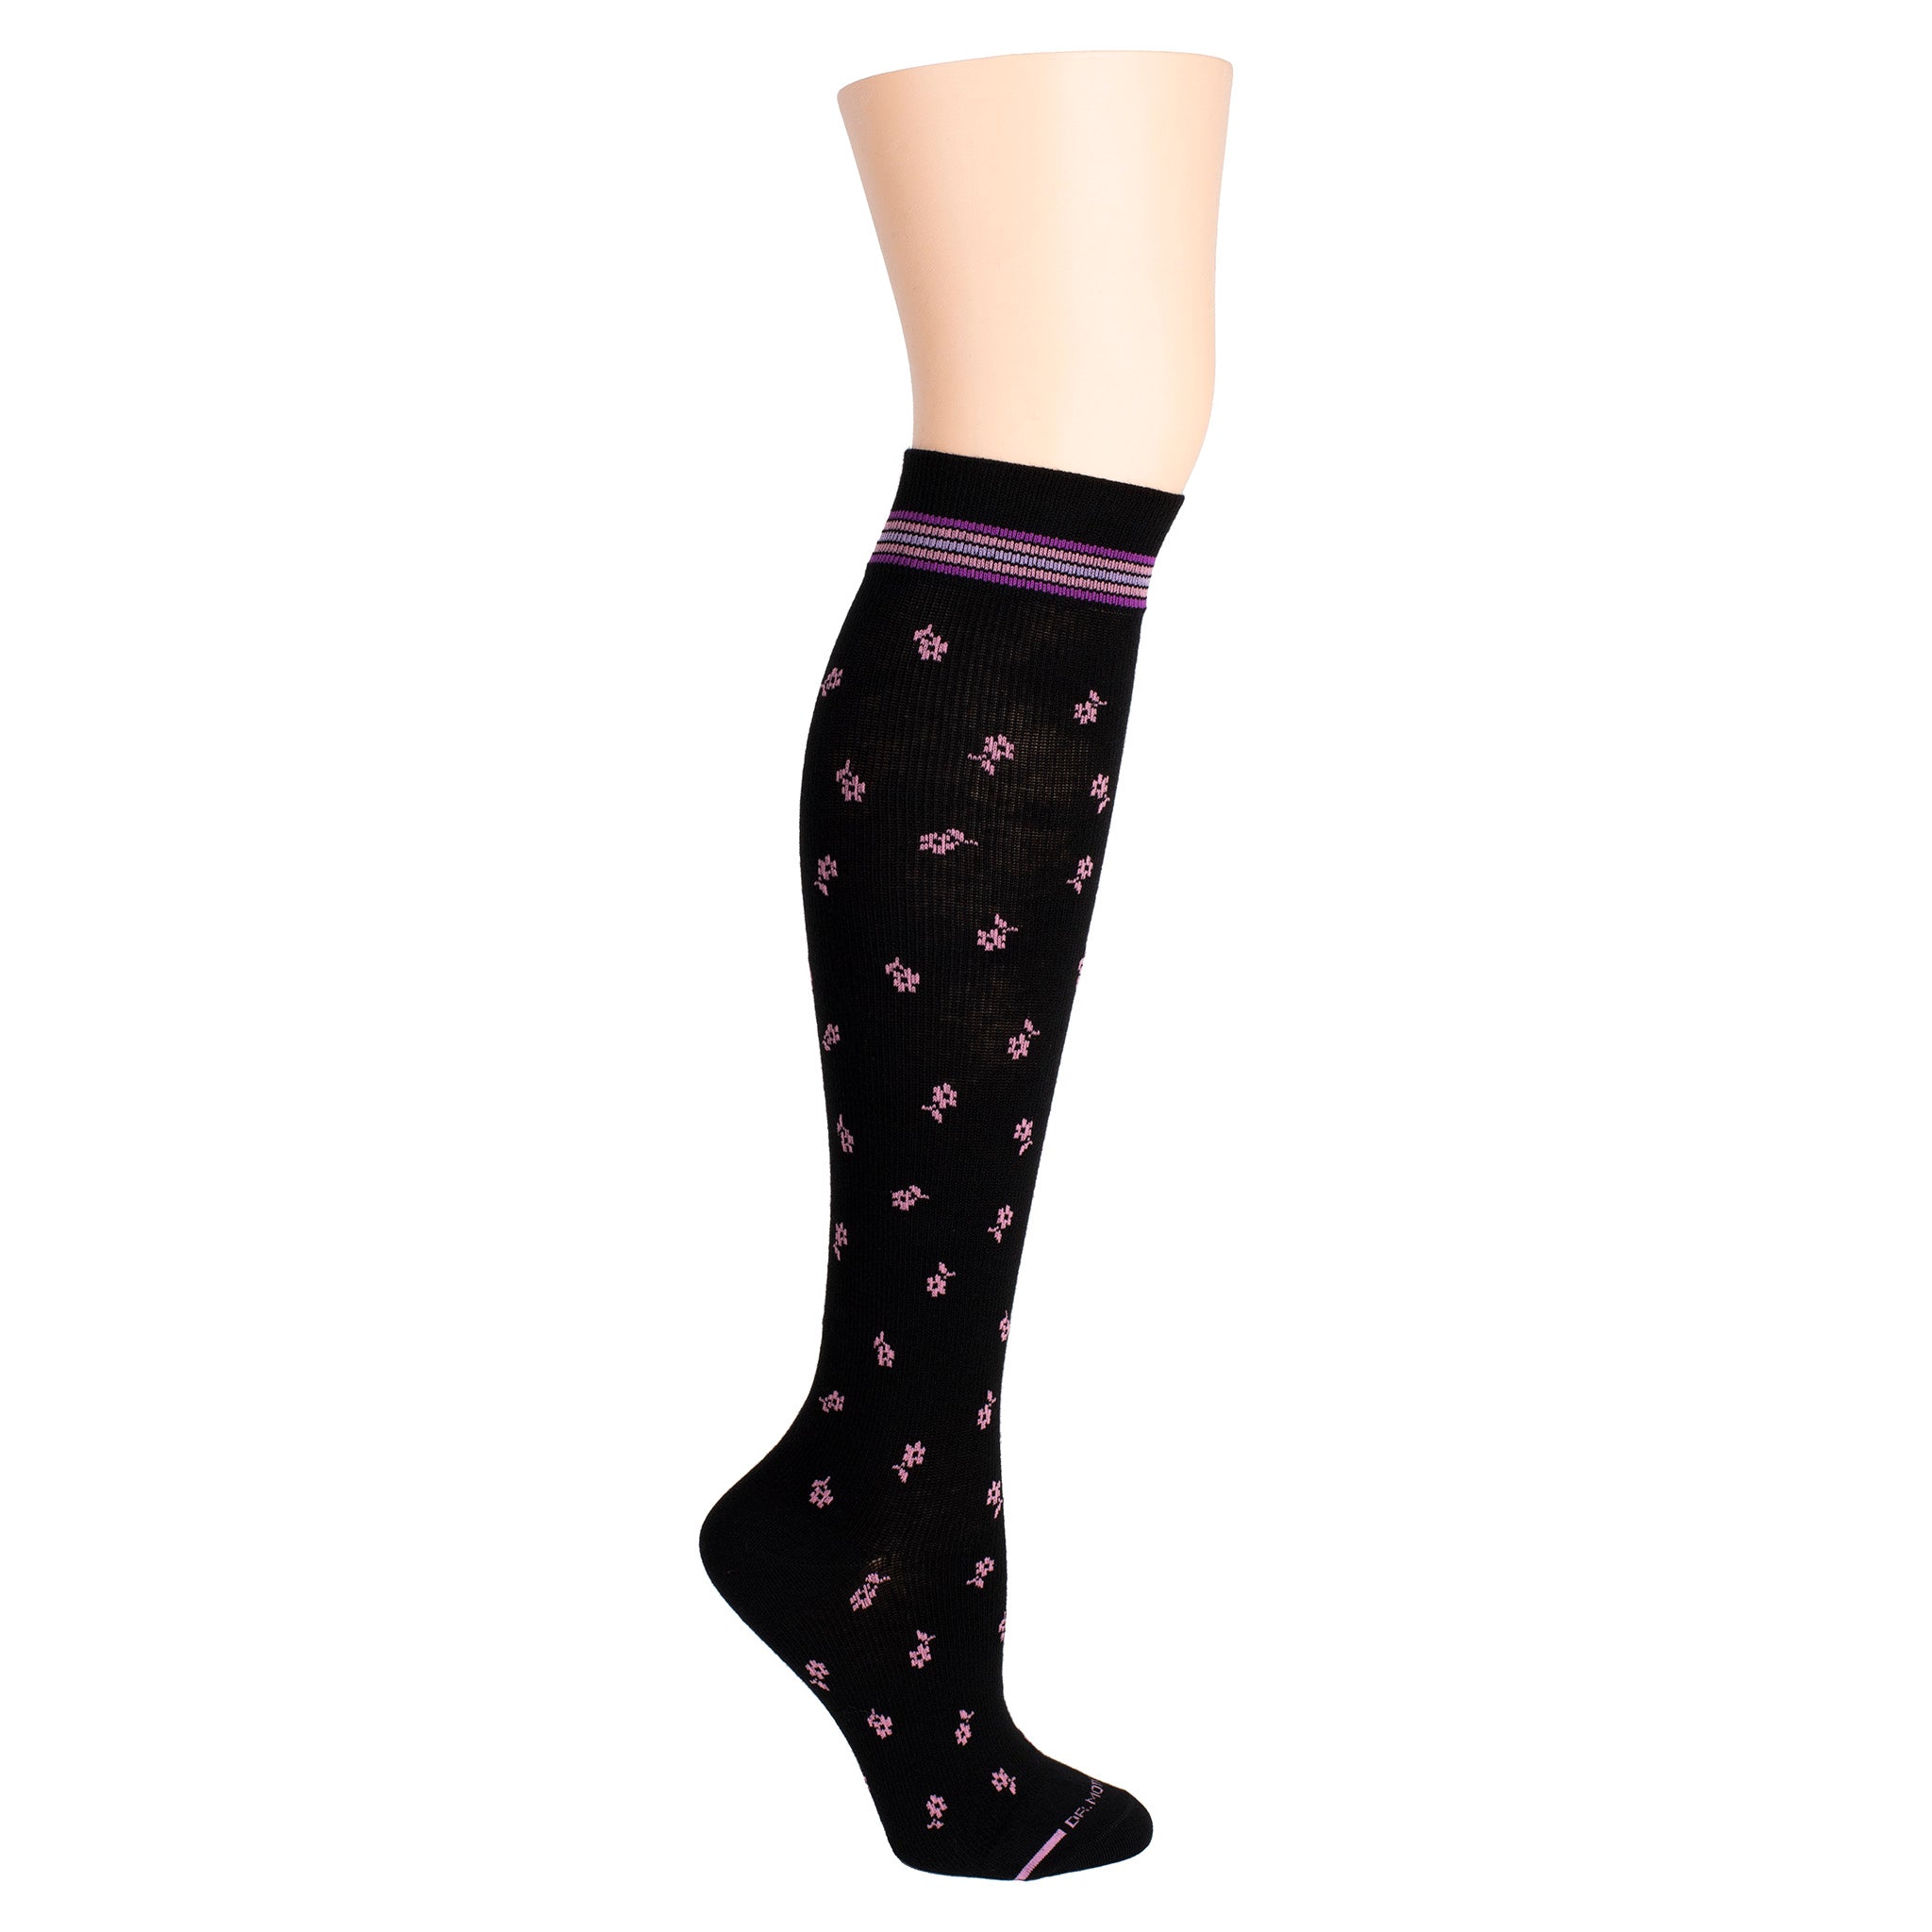 Women's Support Knee High Socks with 15–21 Graduated Compression - and  TravelSmith Travel Solutions and Gear